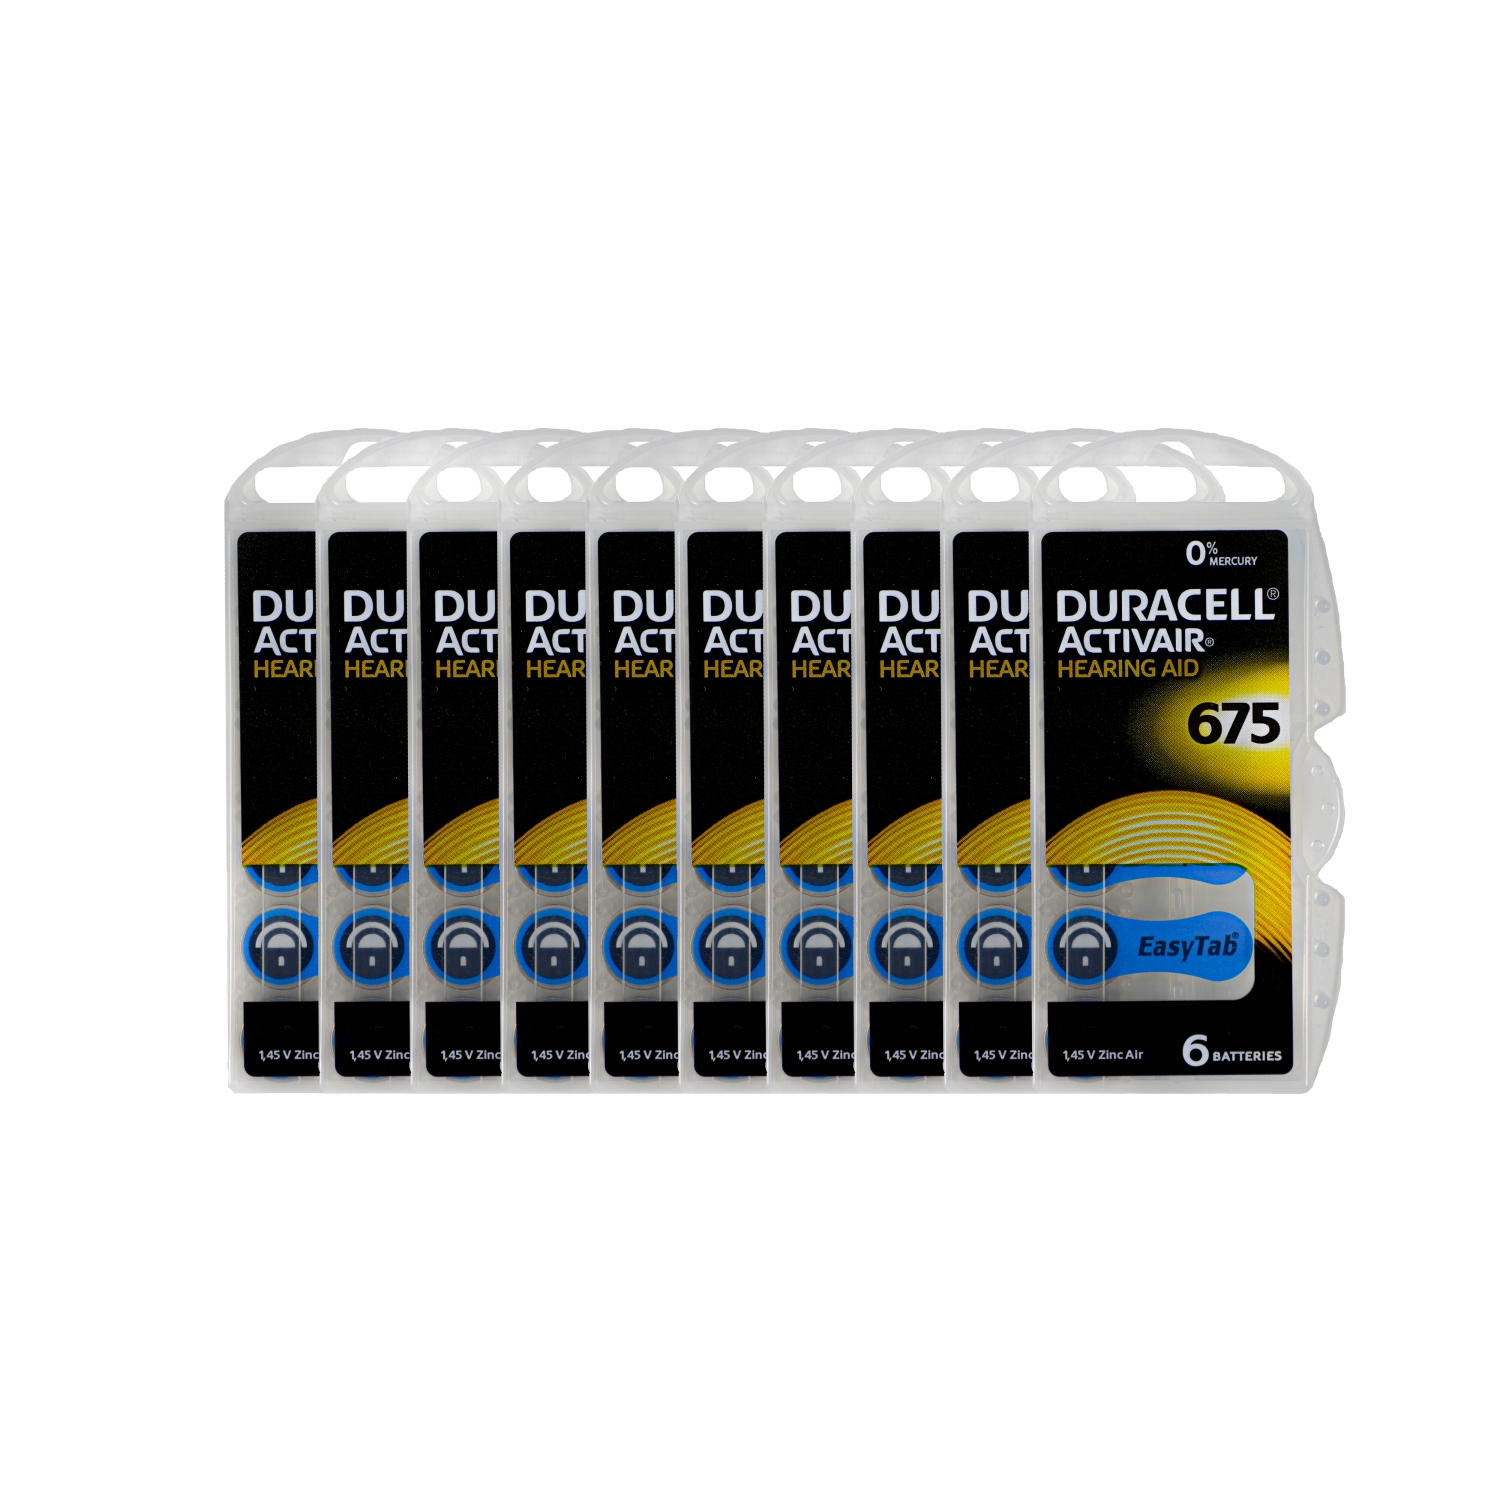 Duracell Activair Size 675 (60 Pack) - Hearing Aid Batteries